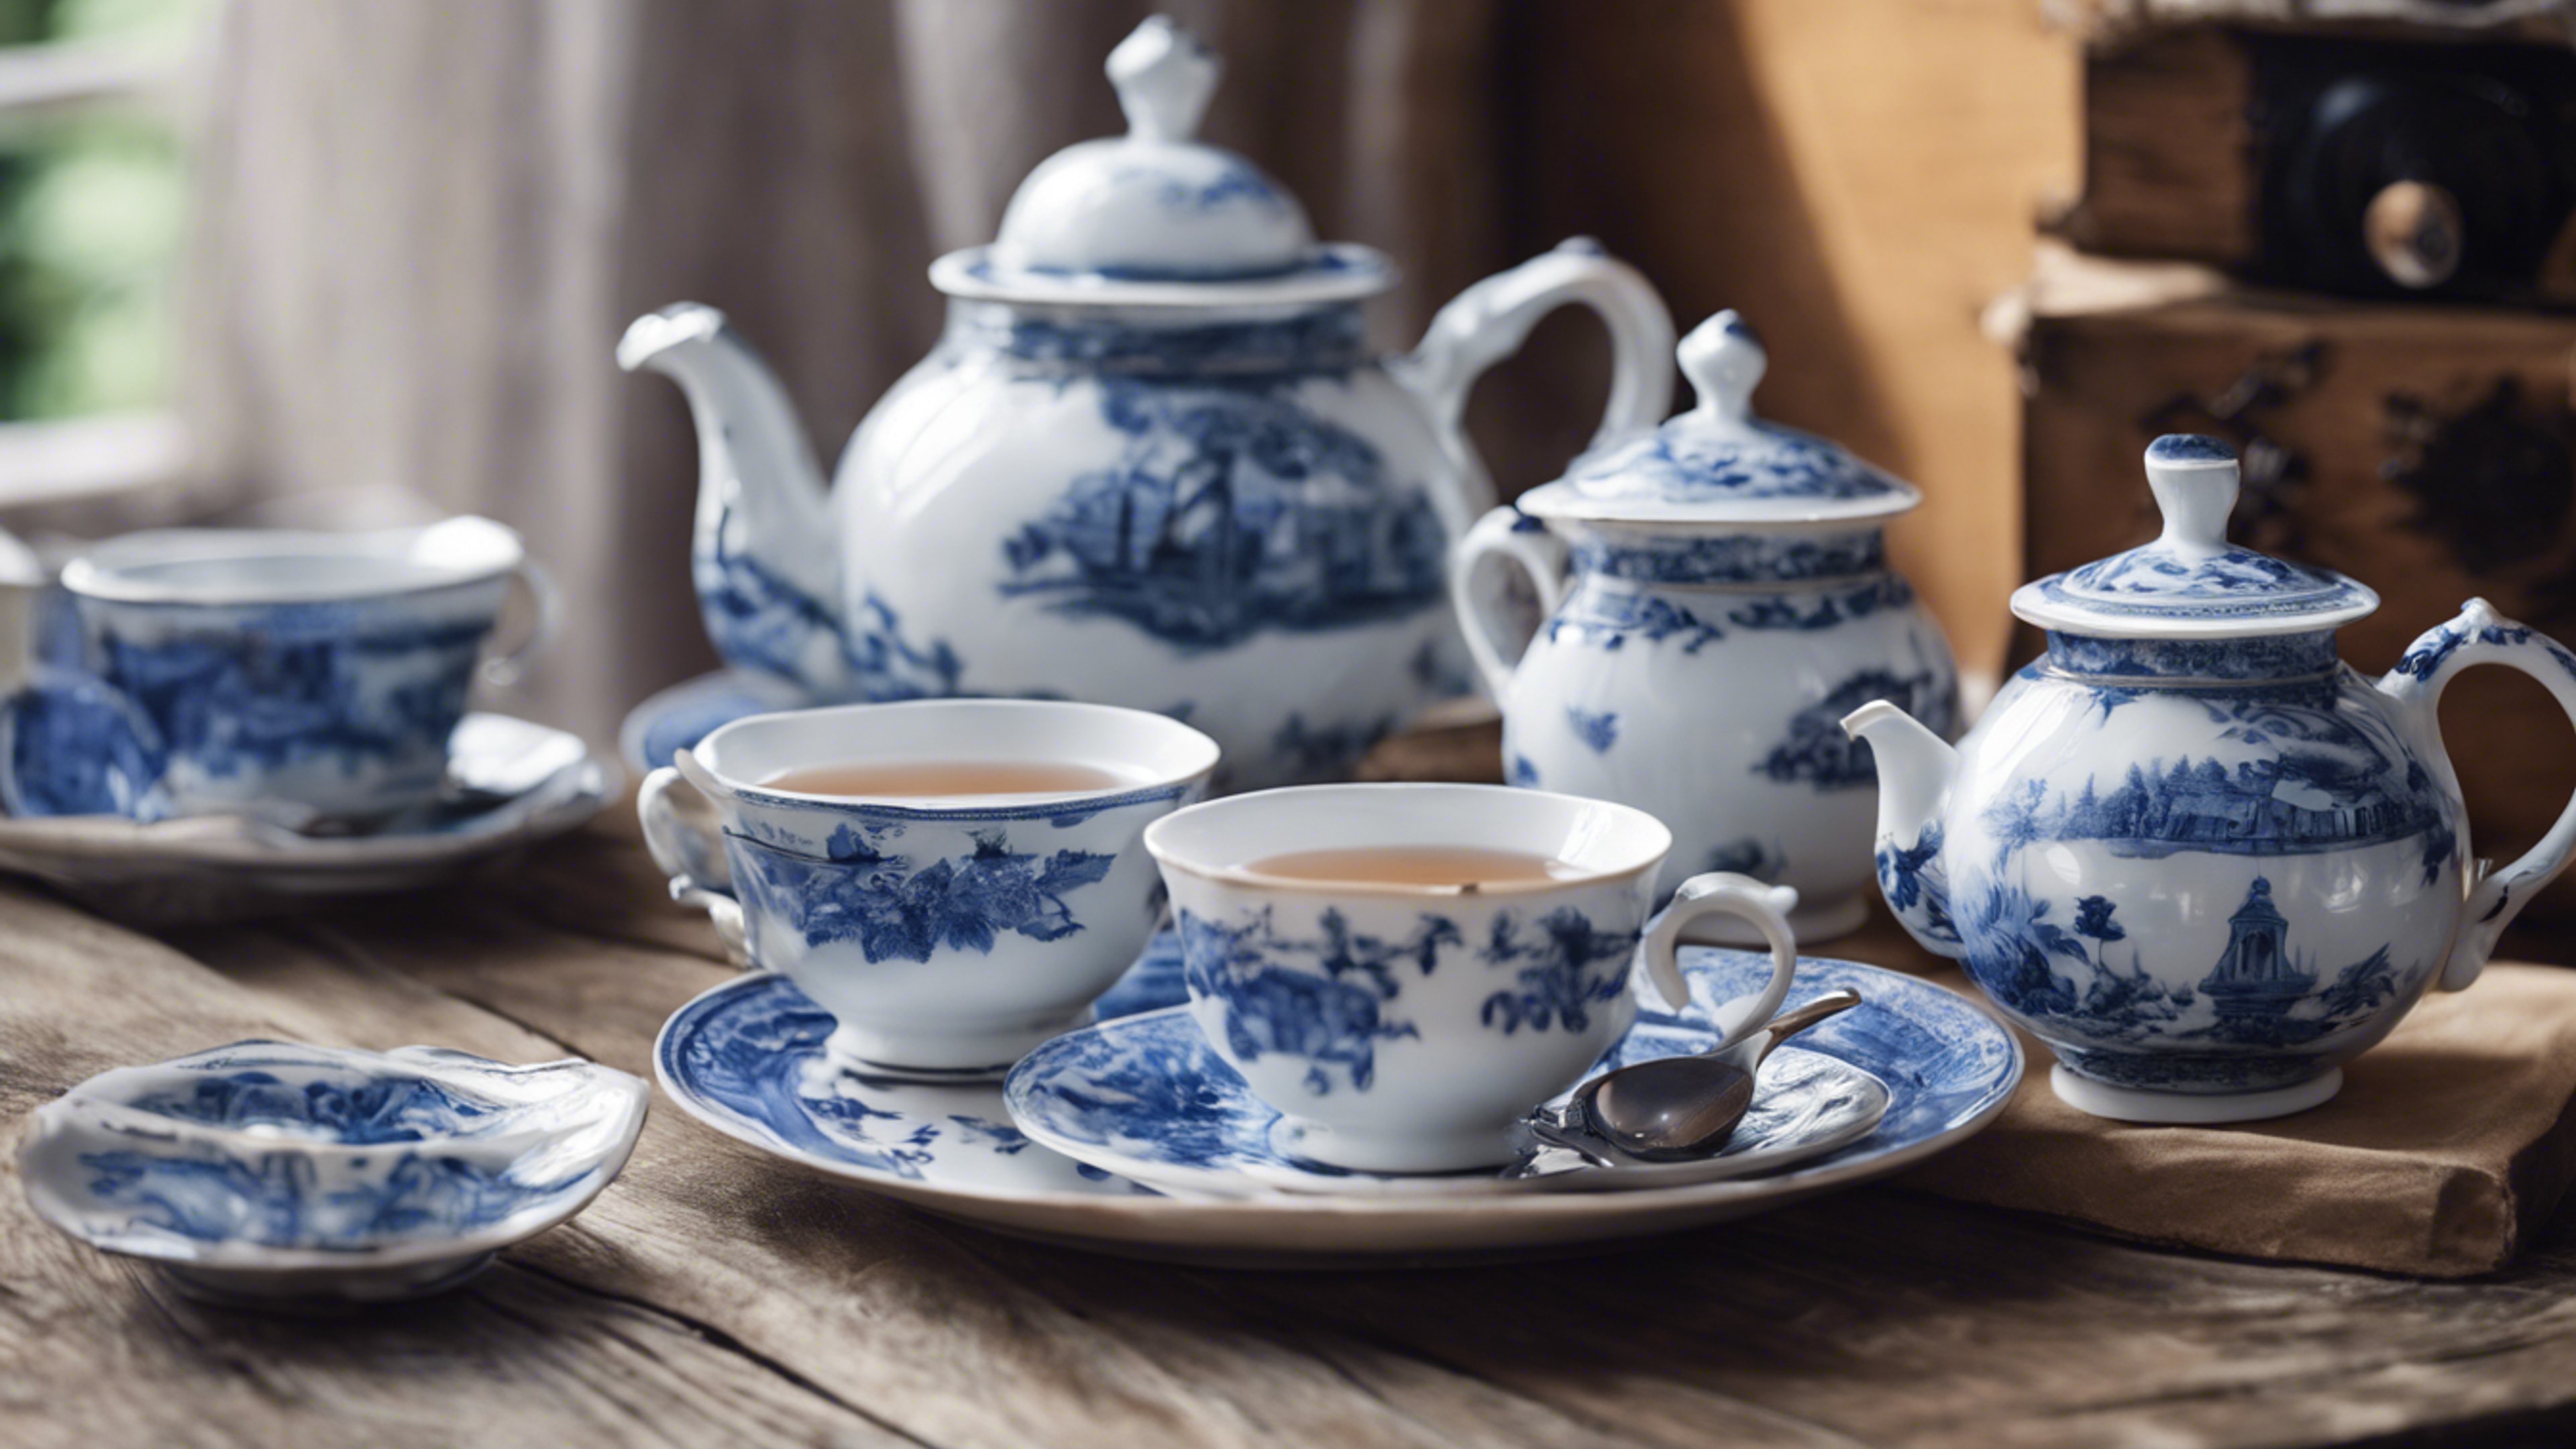 Vintage porcelain tea set in blue and white, placed on a rustic wooden table. Wallpaper[4fbd951e4e494dd09da7]